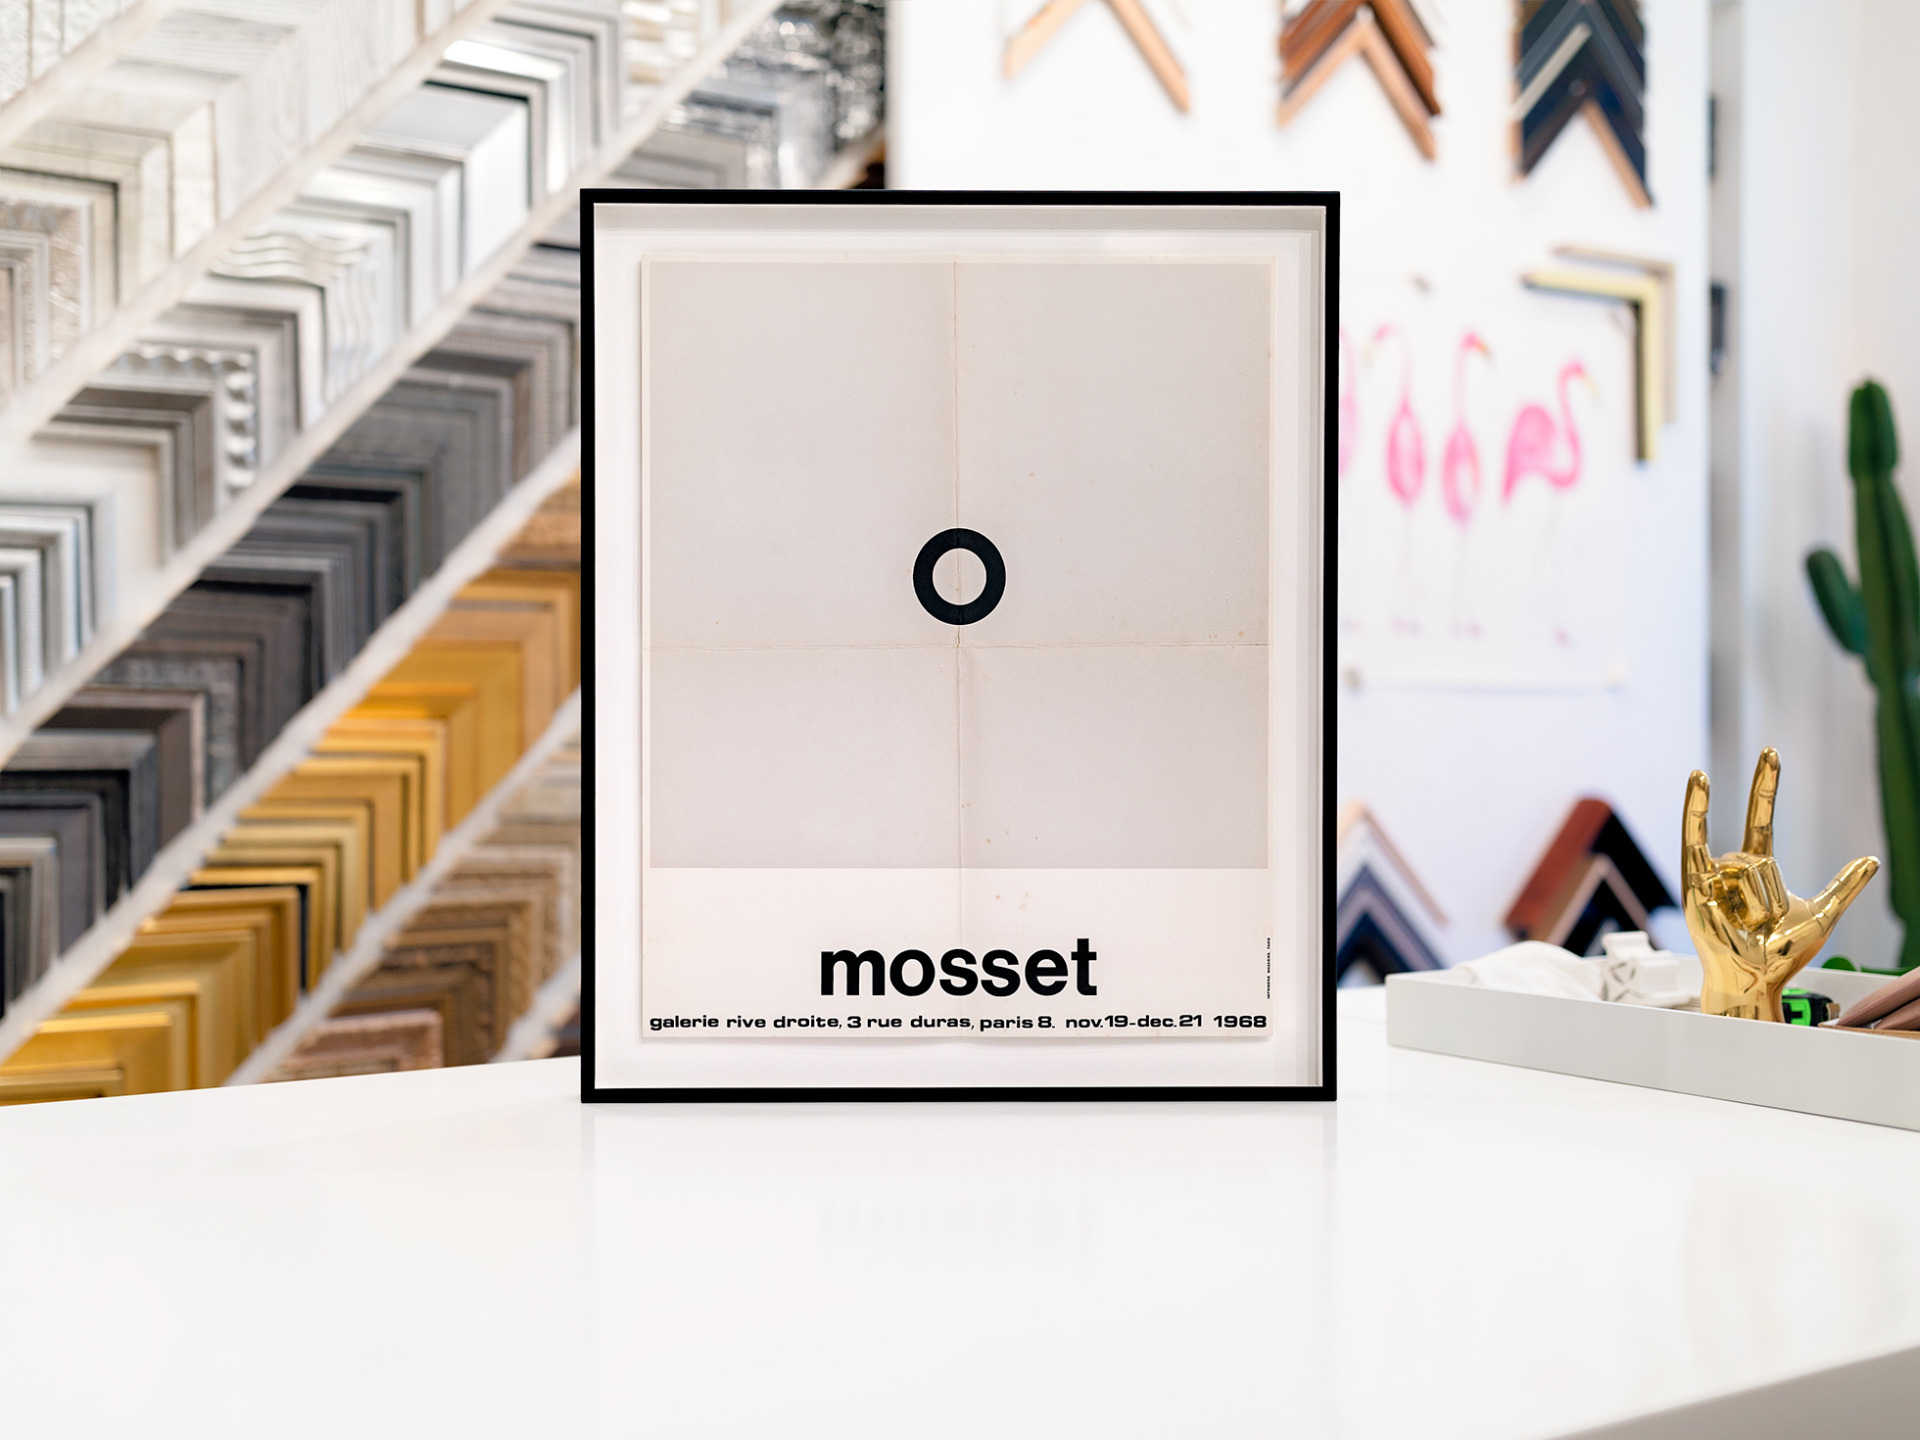 Vintage, creased and discolored, Mosset poster floating on a clean, bright white mat and framed with a thin, welded aluminum black frame.